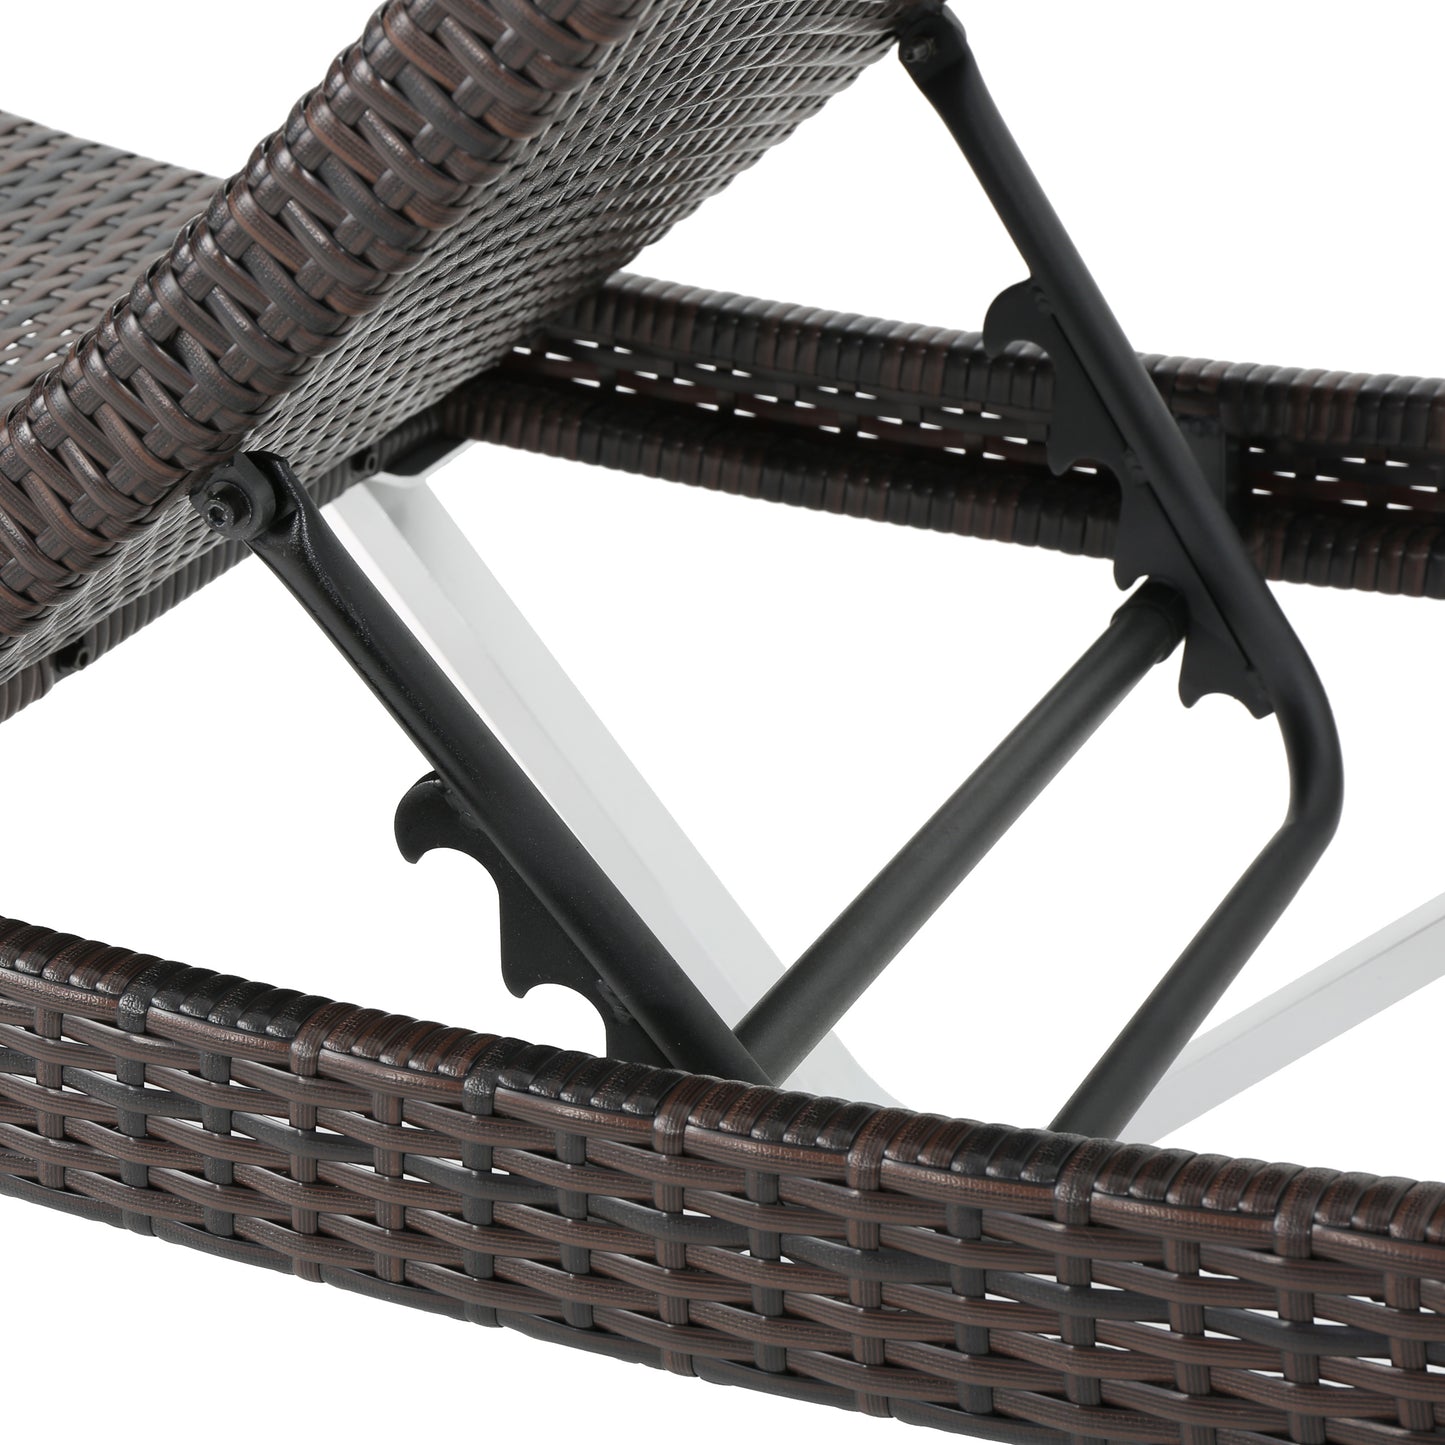 Manuela Outdoor Multi Brown Wicker Chaise Lounge with Table